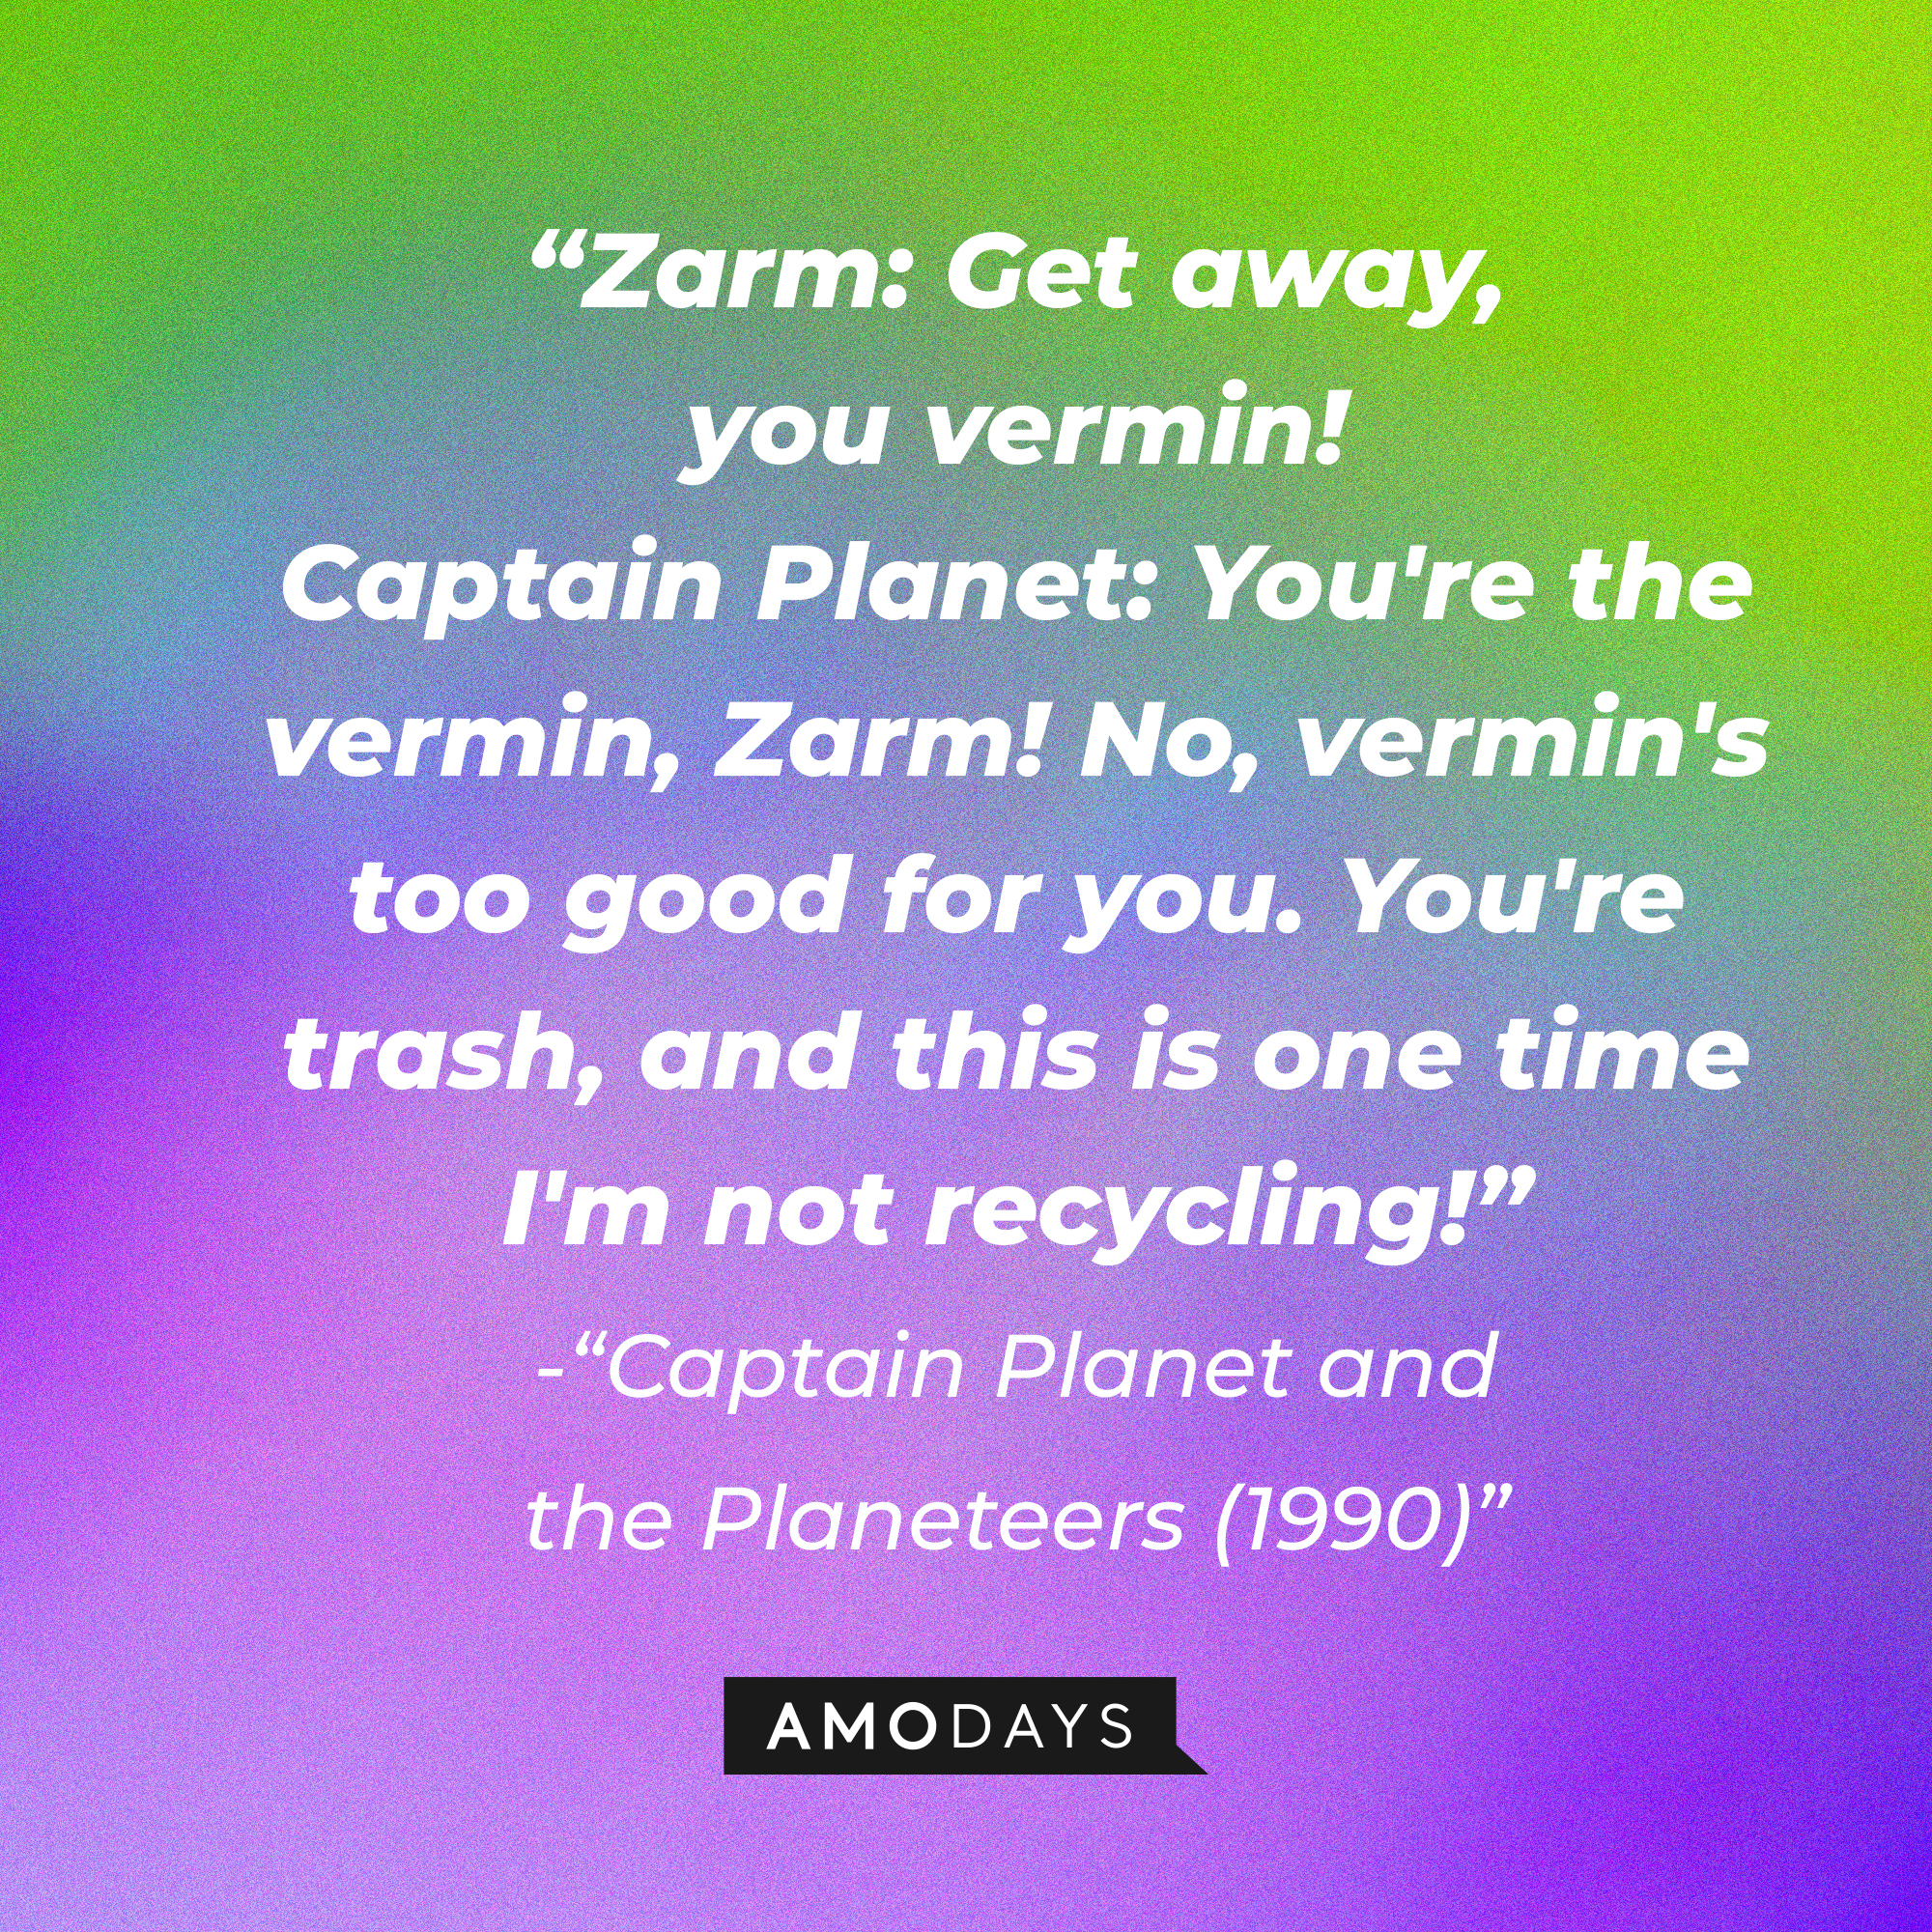 “Captain Planet and the Planeteers (1990)” dialogue: “Zarm: Get away, you vermin! Captain Planet: You're the vermin, Zarm! No, vermin's too good for you. You're trash, and this is one time I'm not recycling!” | Source: Amodays